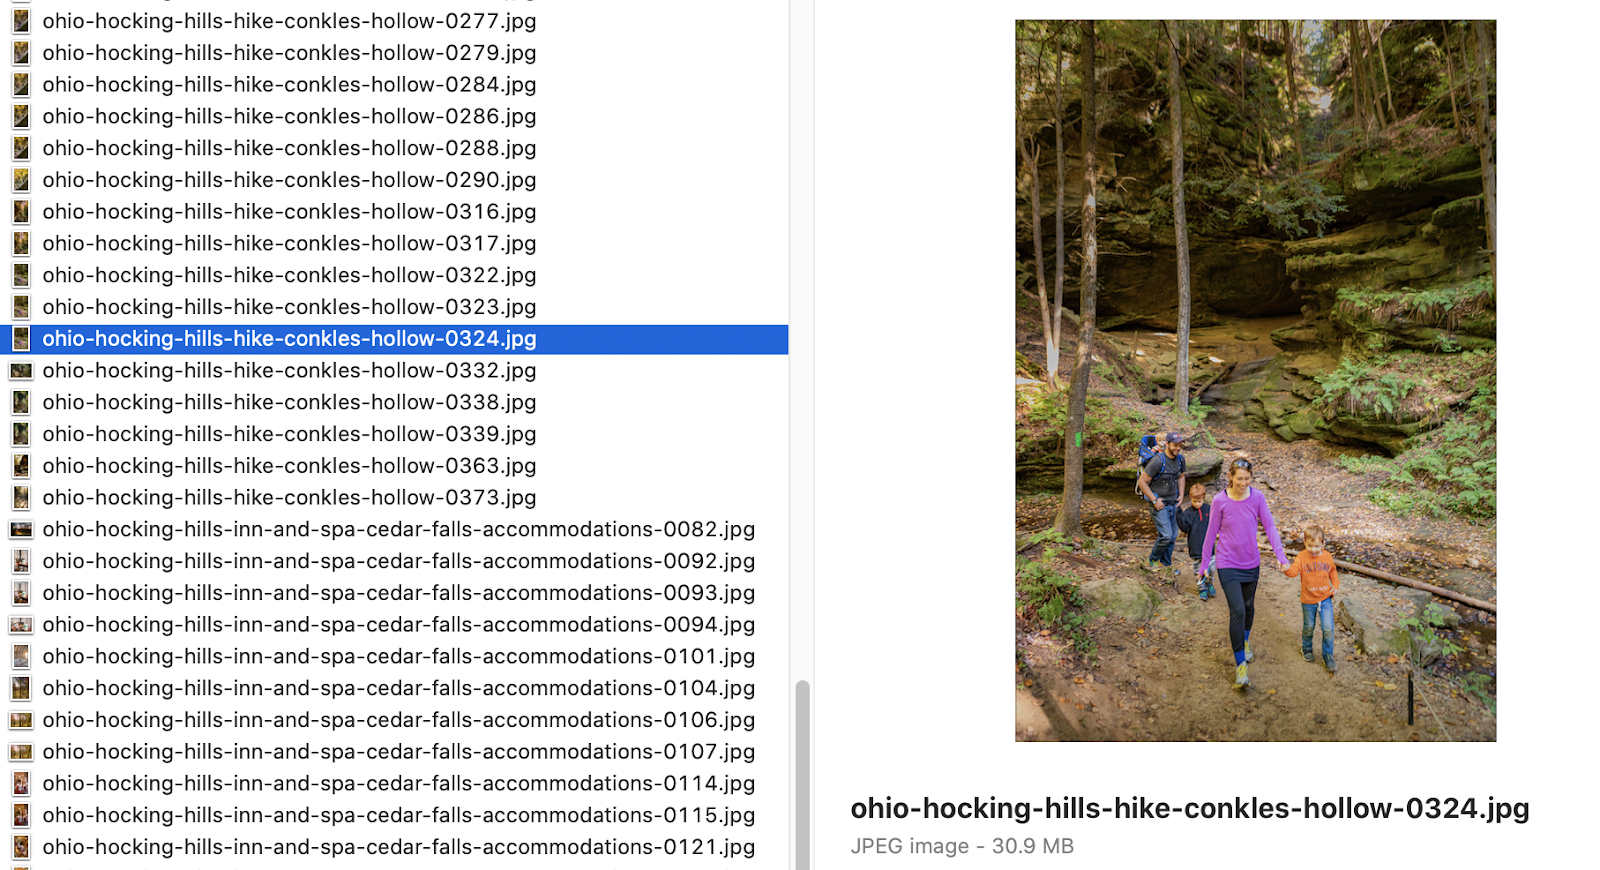 A screenshot of Laura Watilo Blake's file naming convention with a sample of photos from Hocking Hills, Ohio 